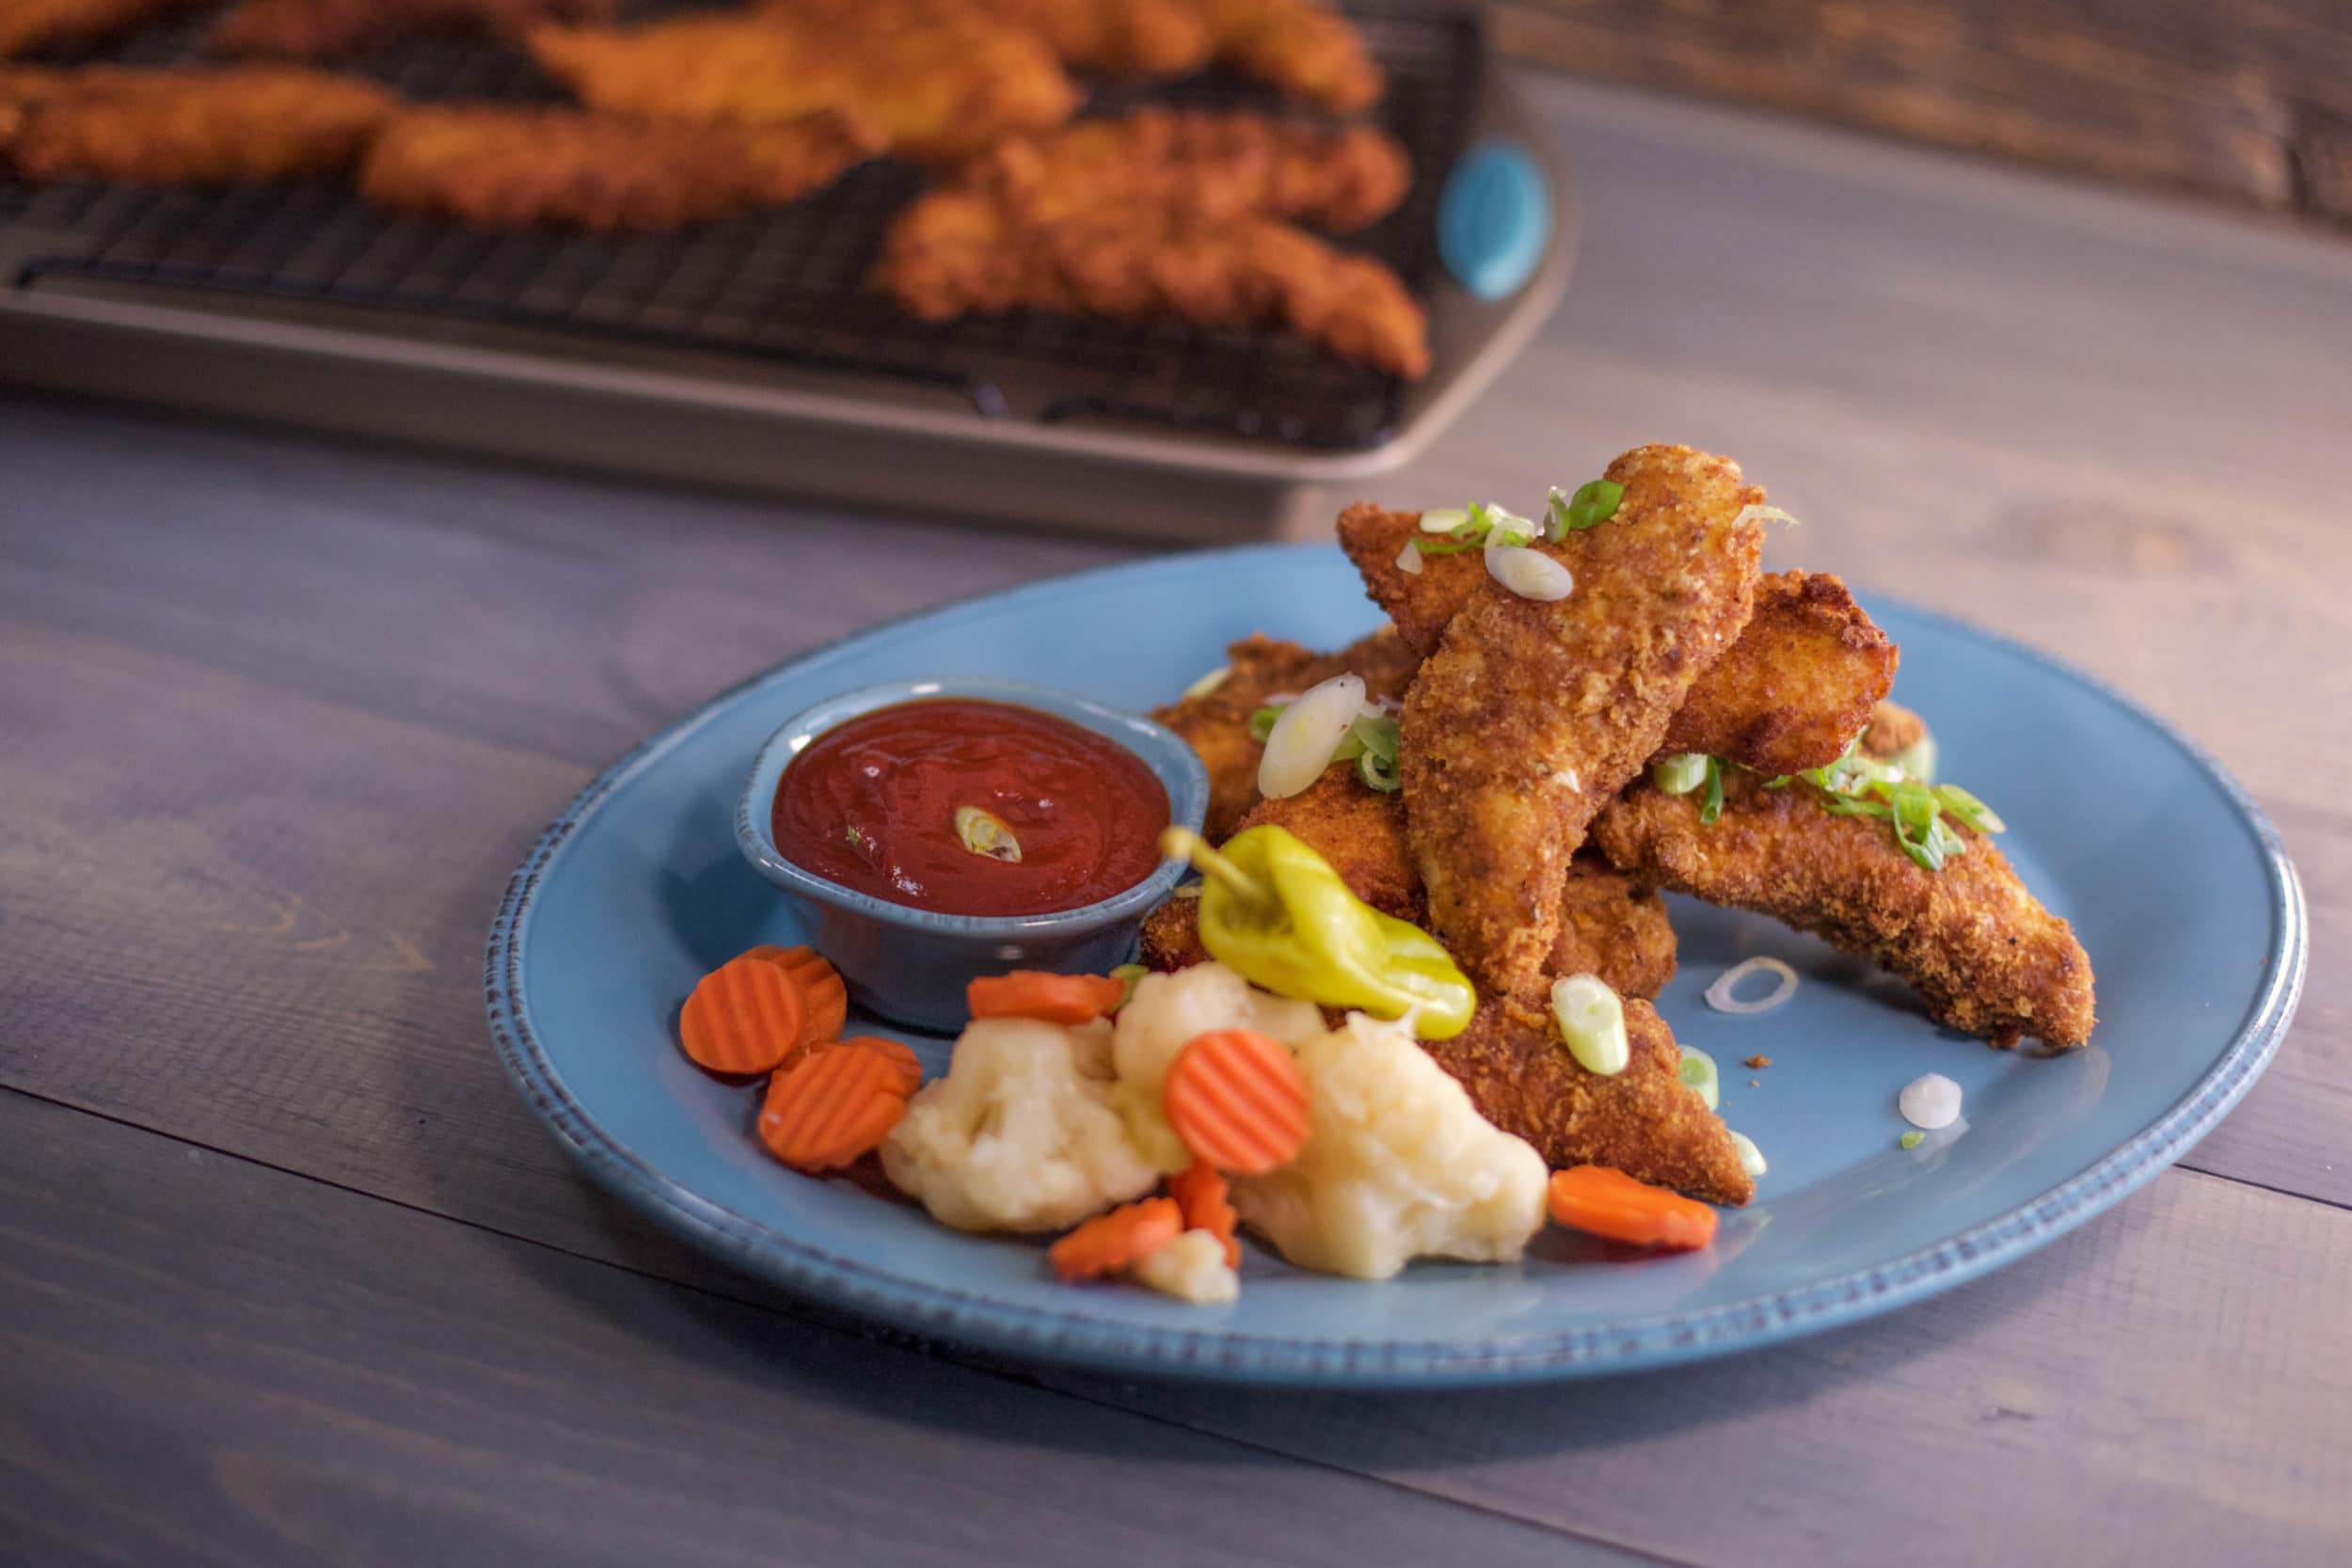 Ritz Cracker Chicken Fingers with Sriracha Soy Ketchup